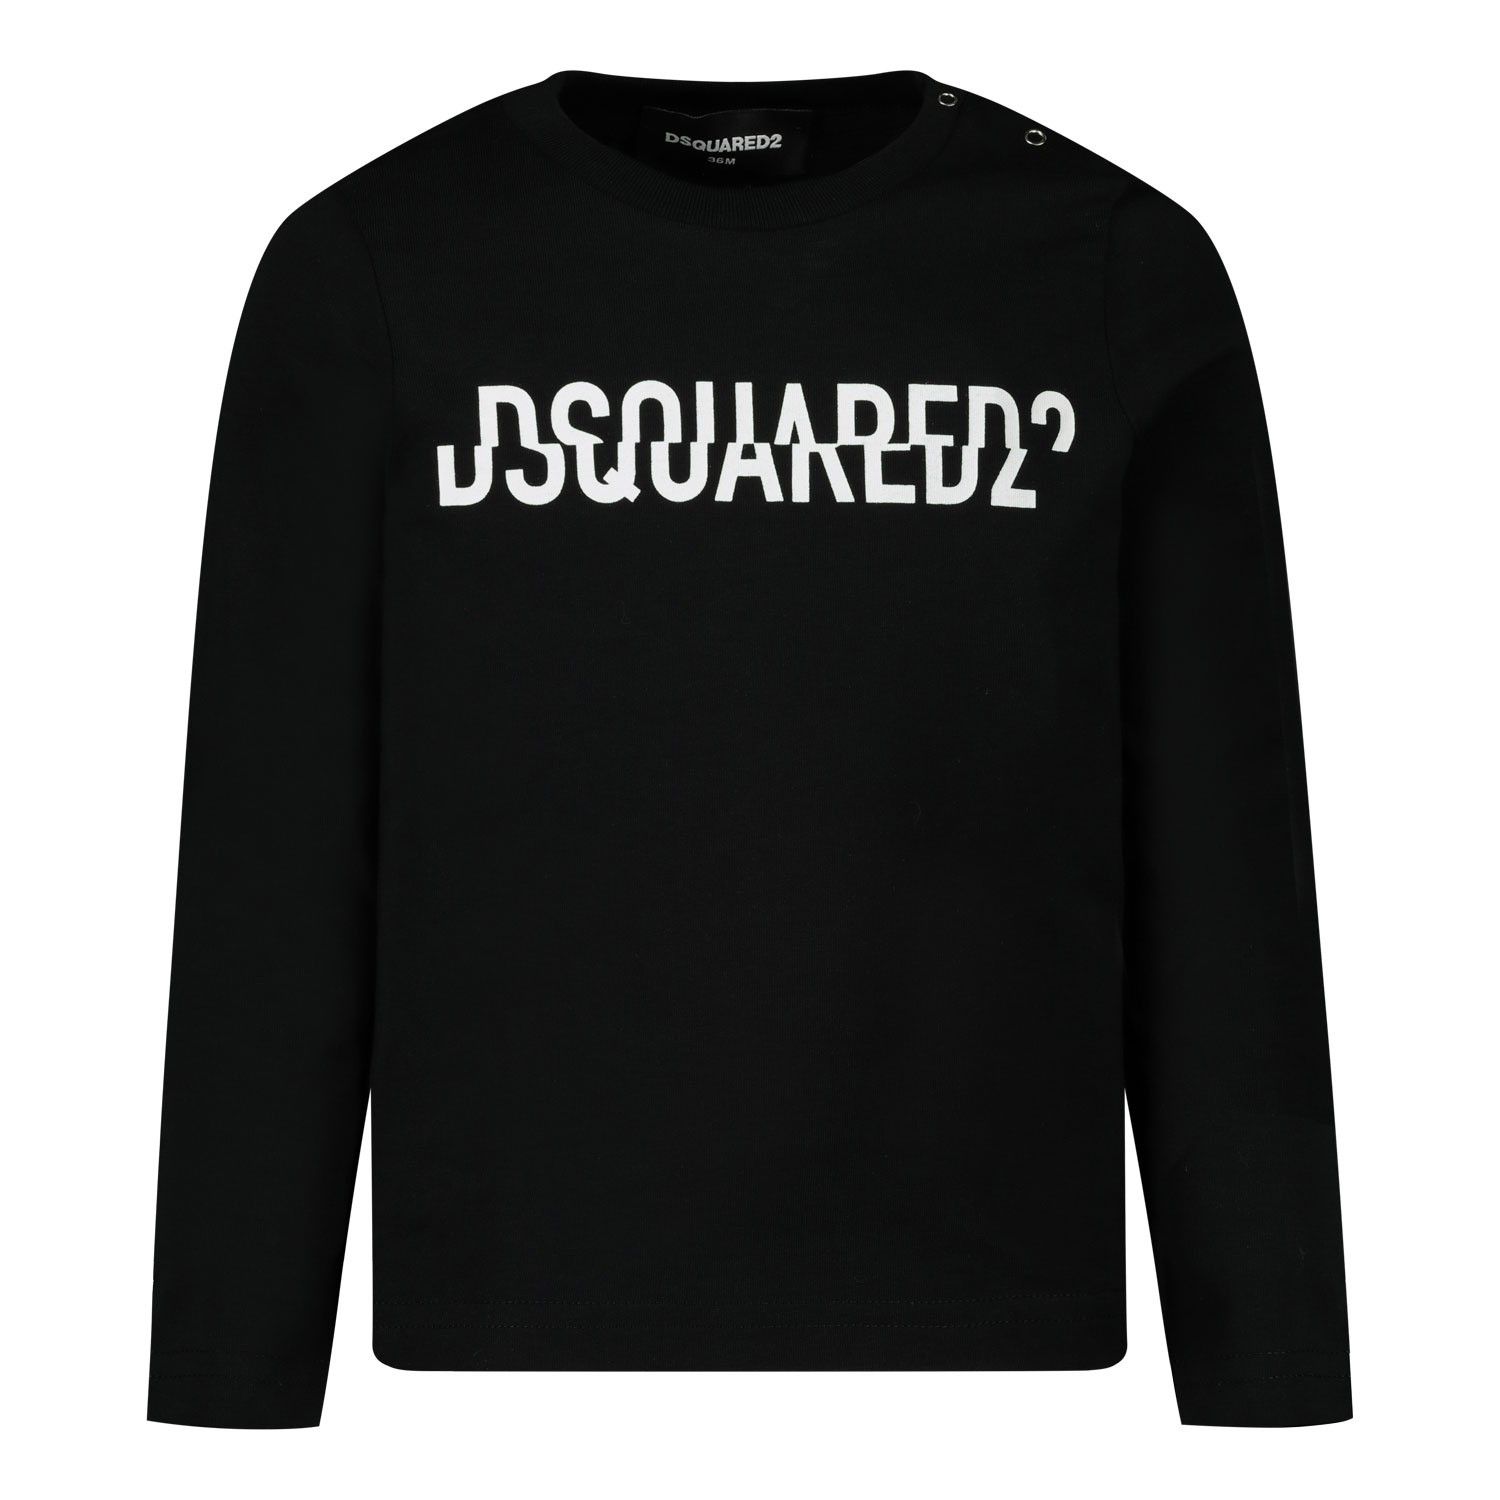 promotioncode dsquared